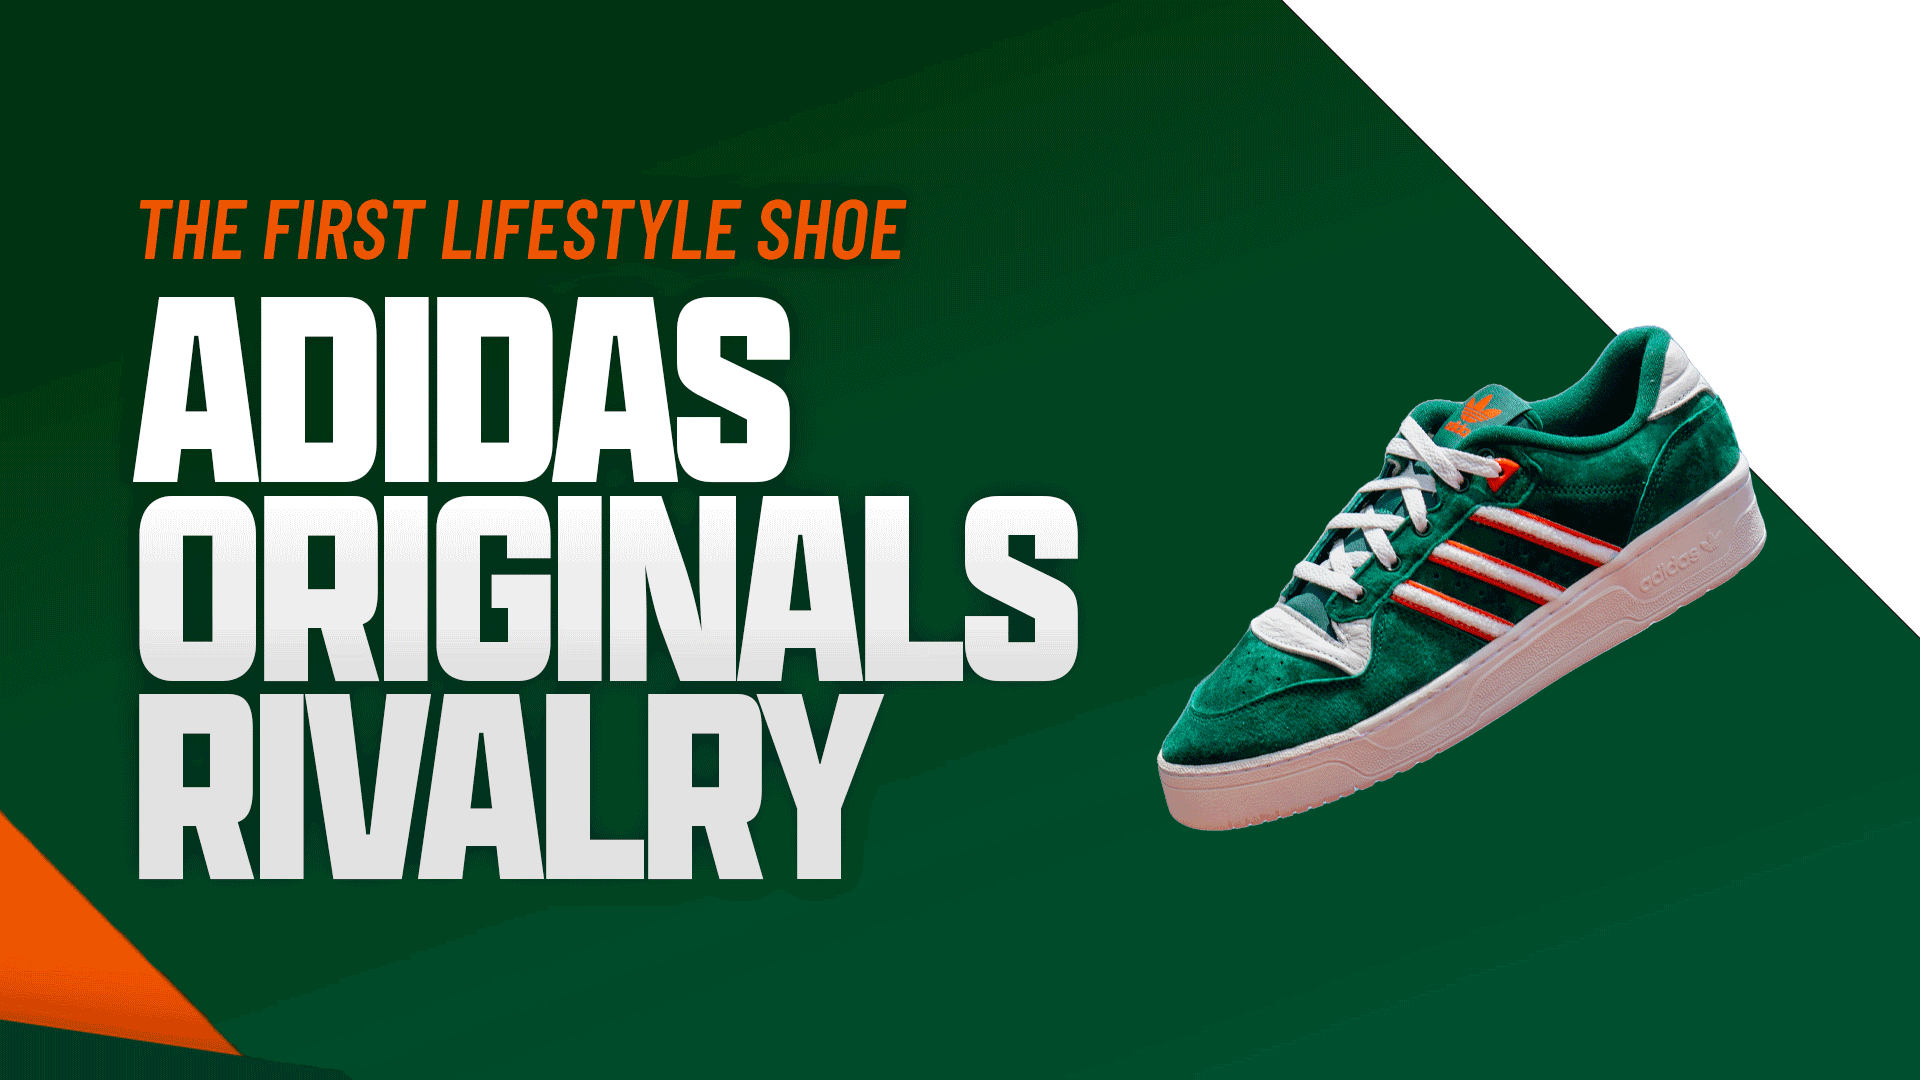 Introducing Our First Lifestyle Shoe